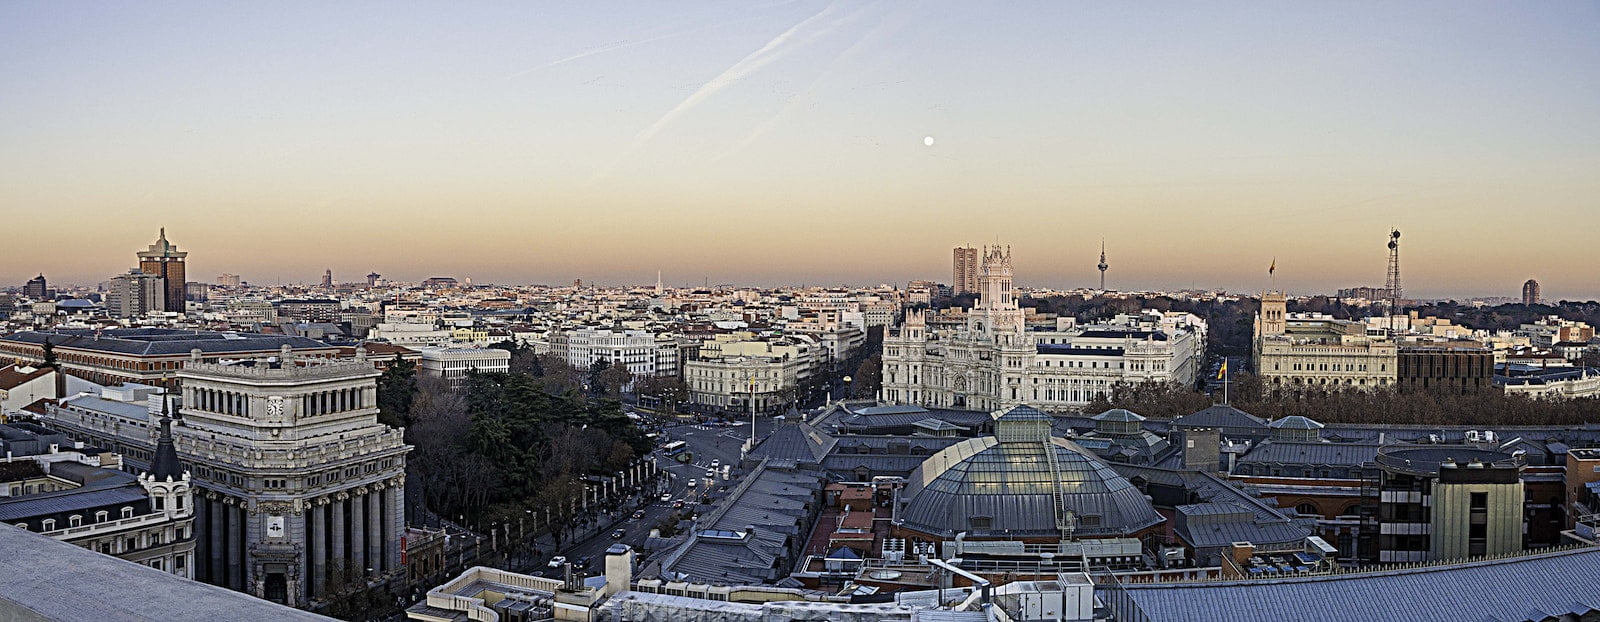 View of Madrid during Sunset